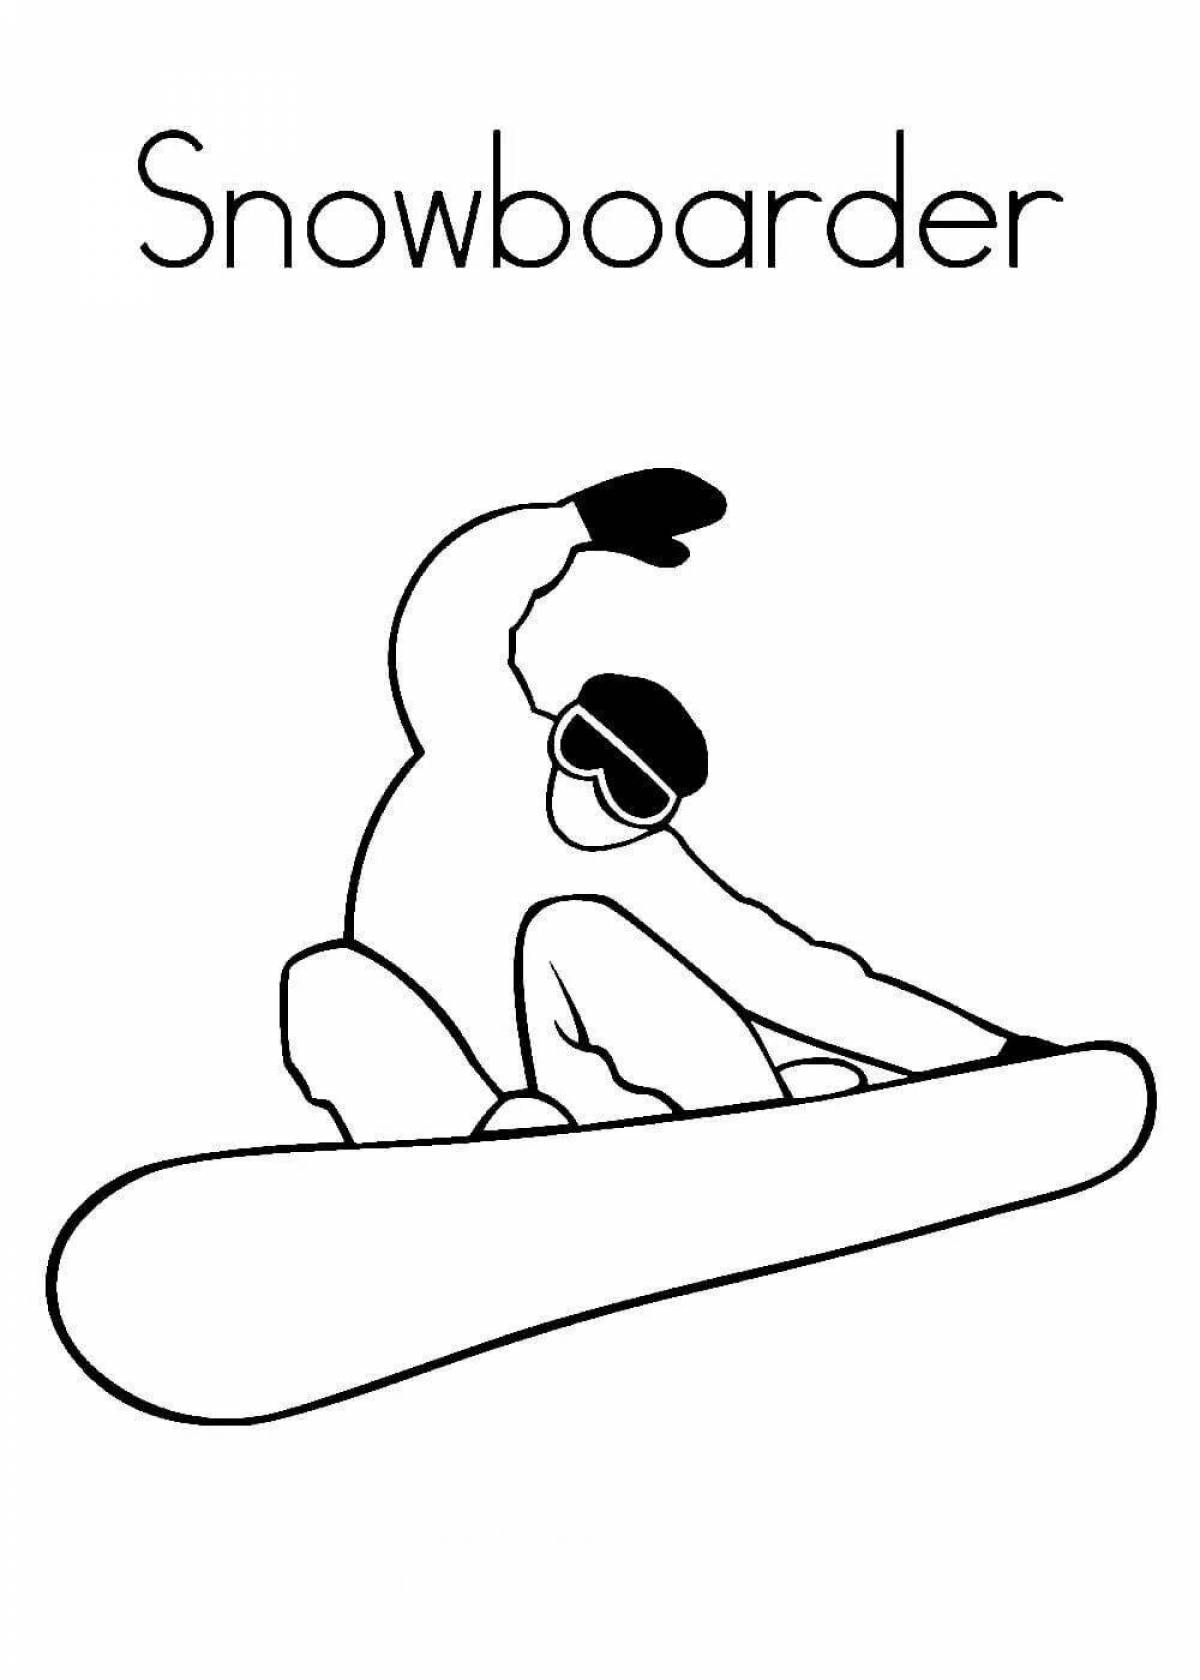 Playful snowboarder coloring page for kids